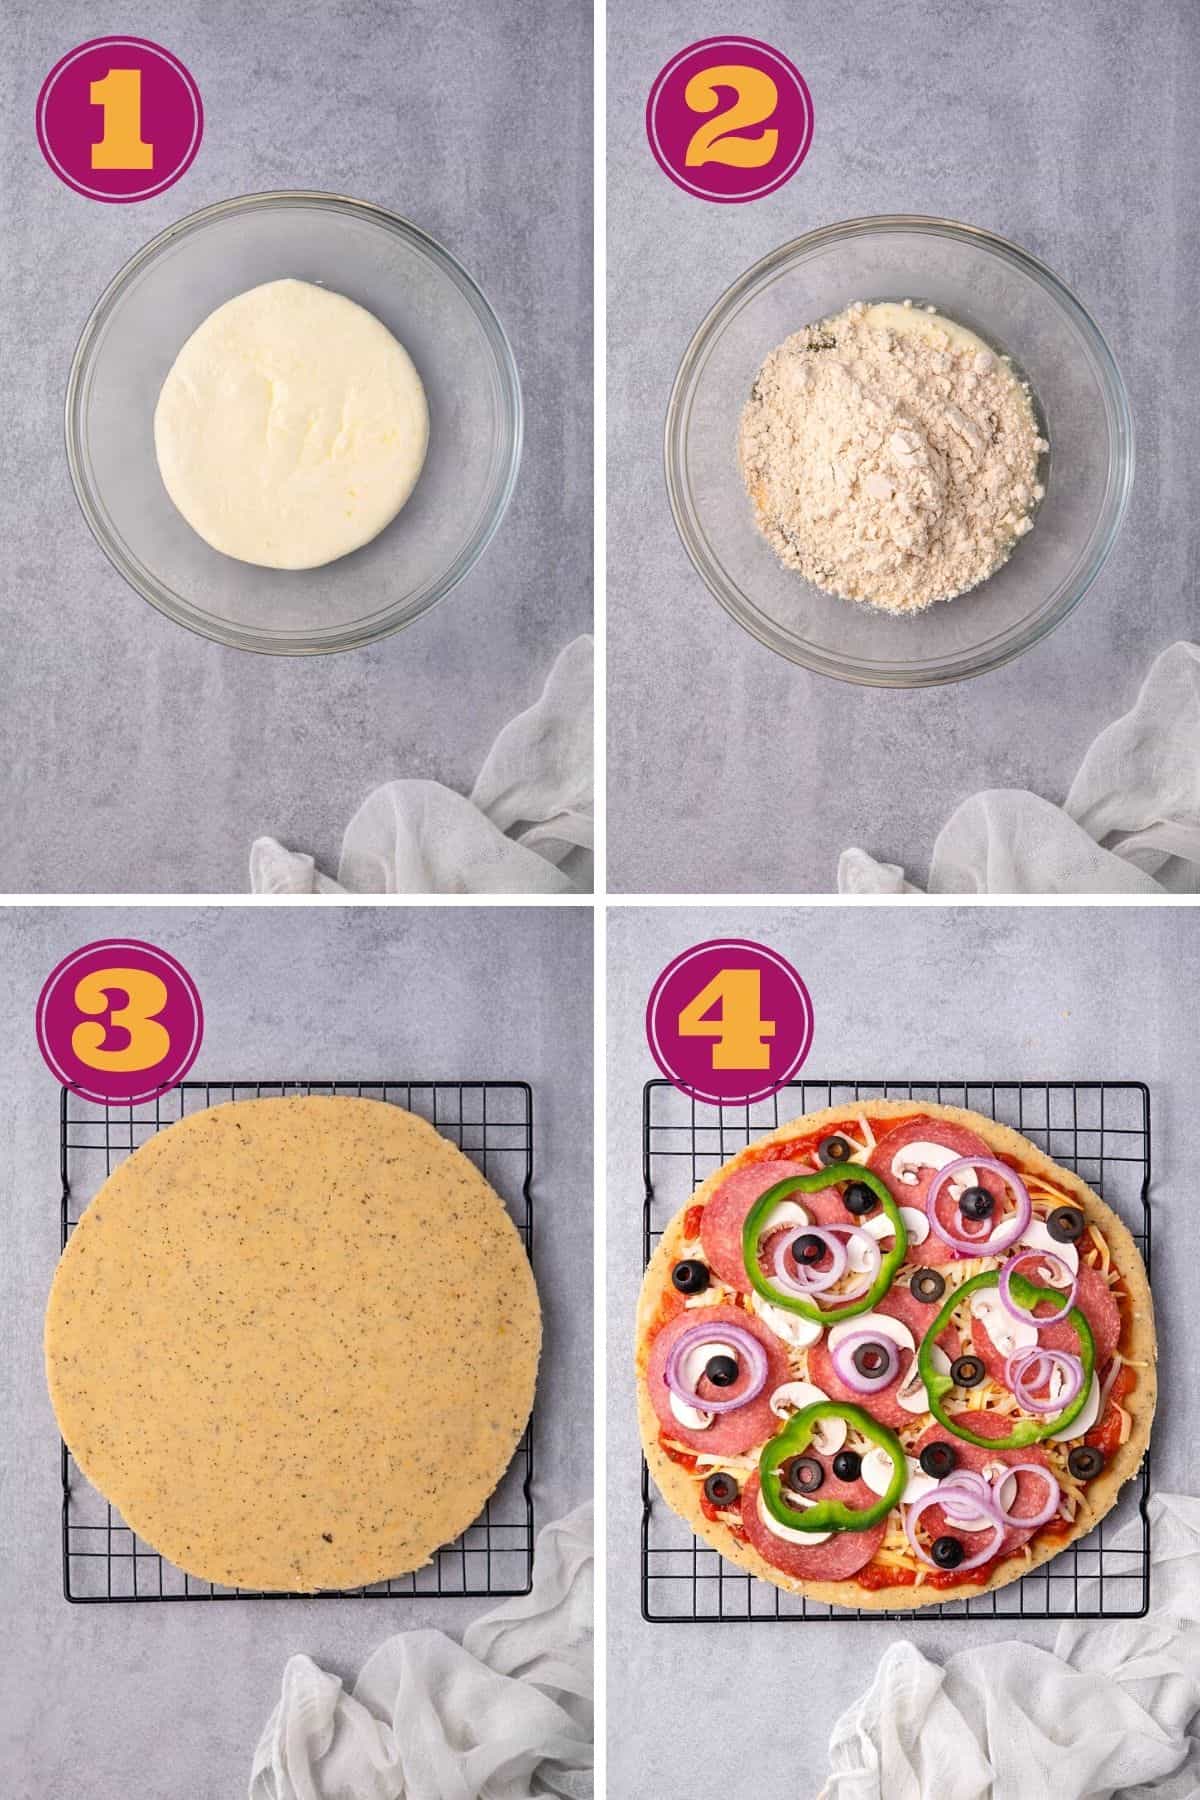 Step by Step process to make Fathead Pizza Dough